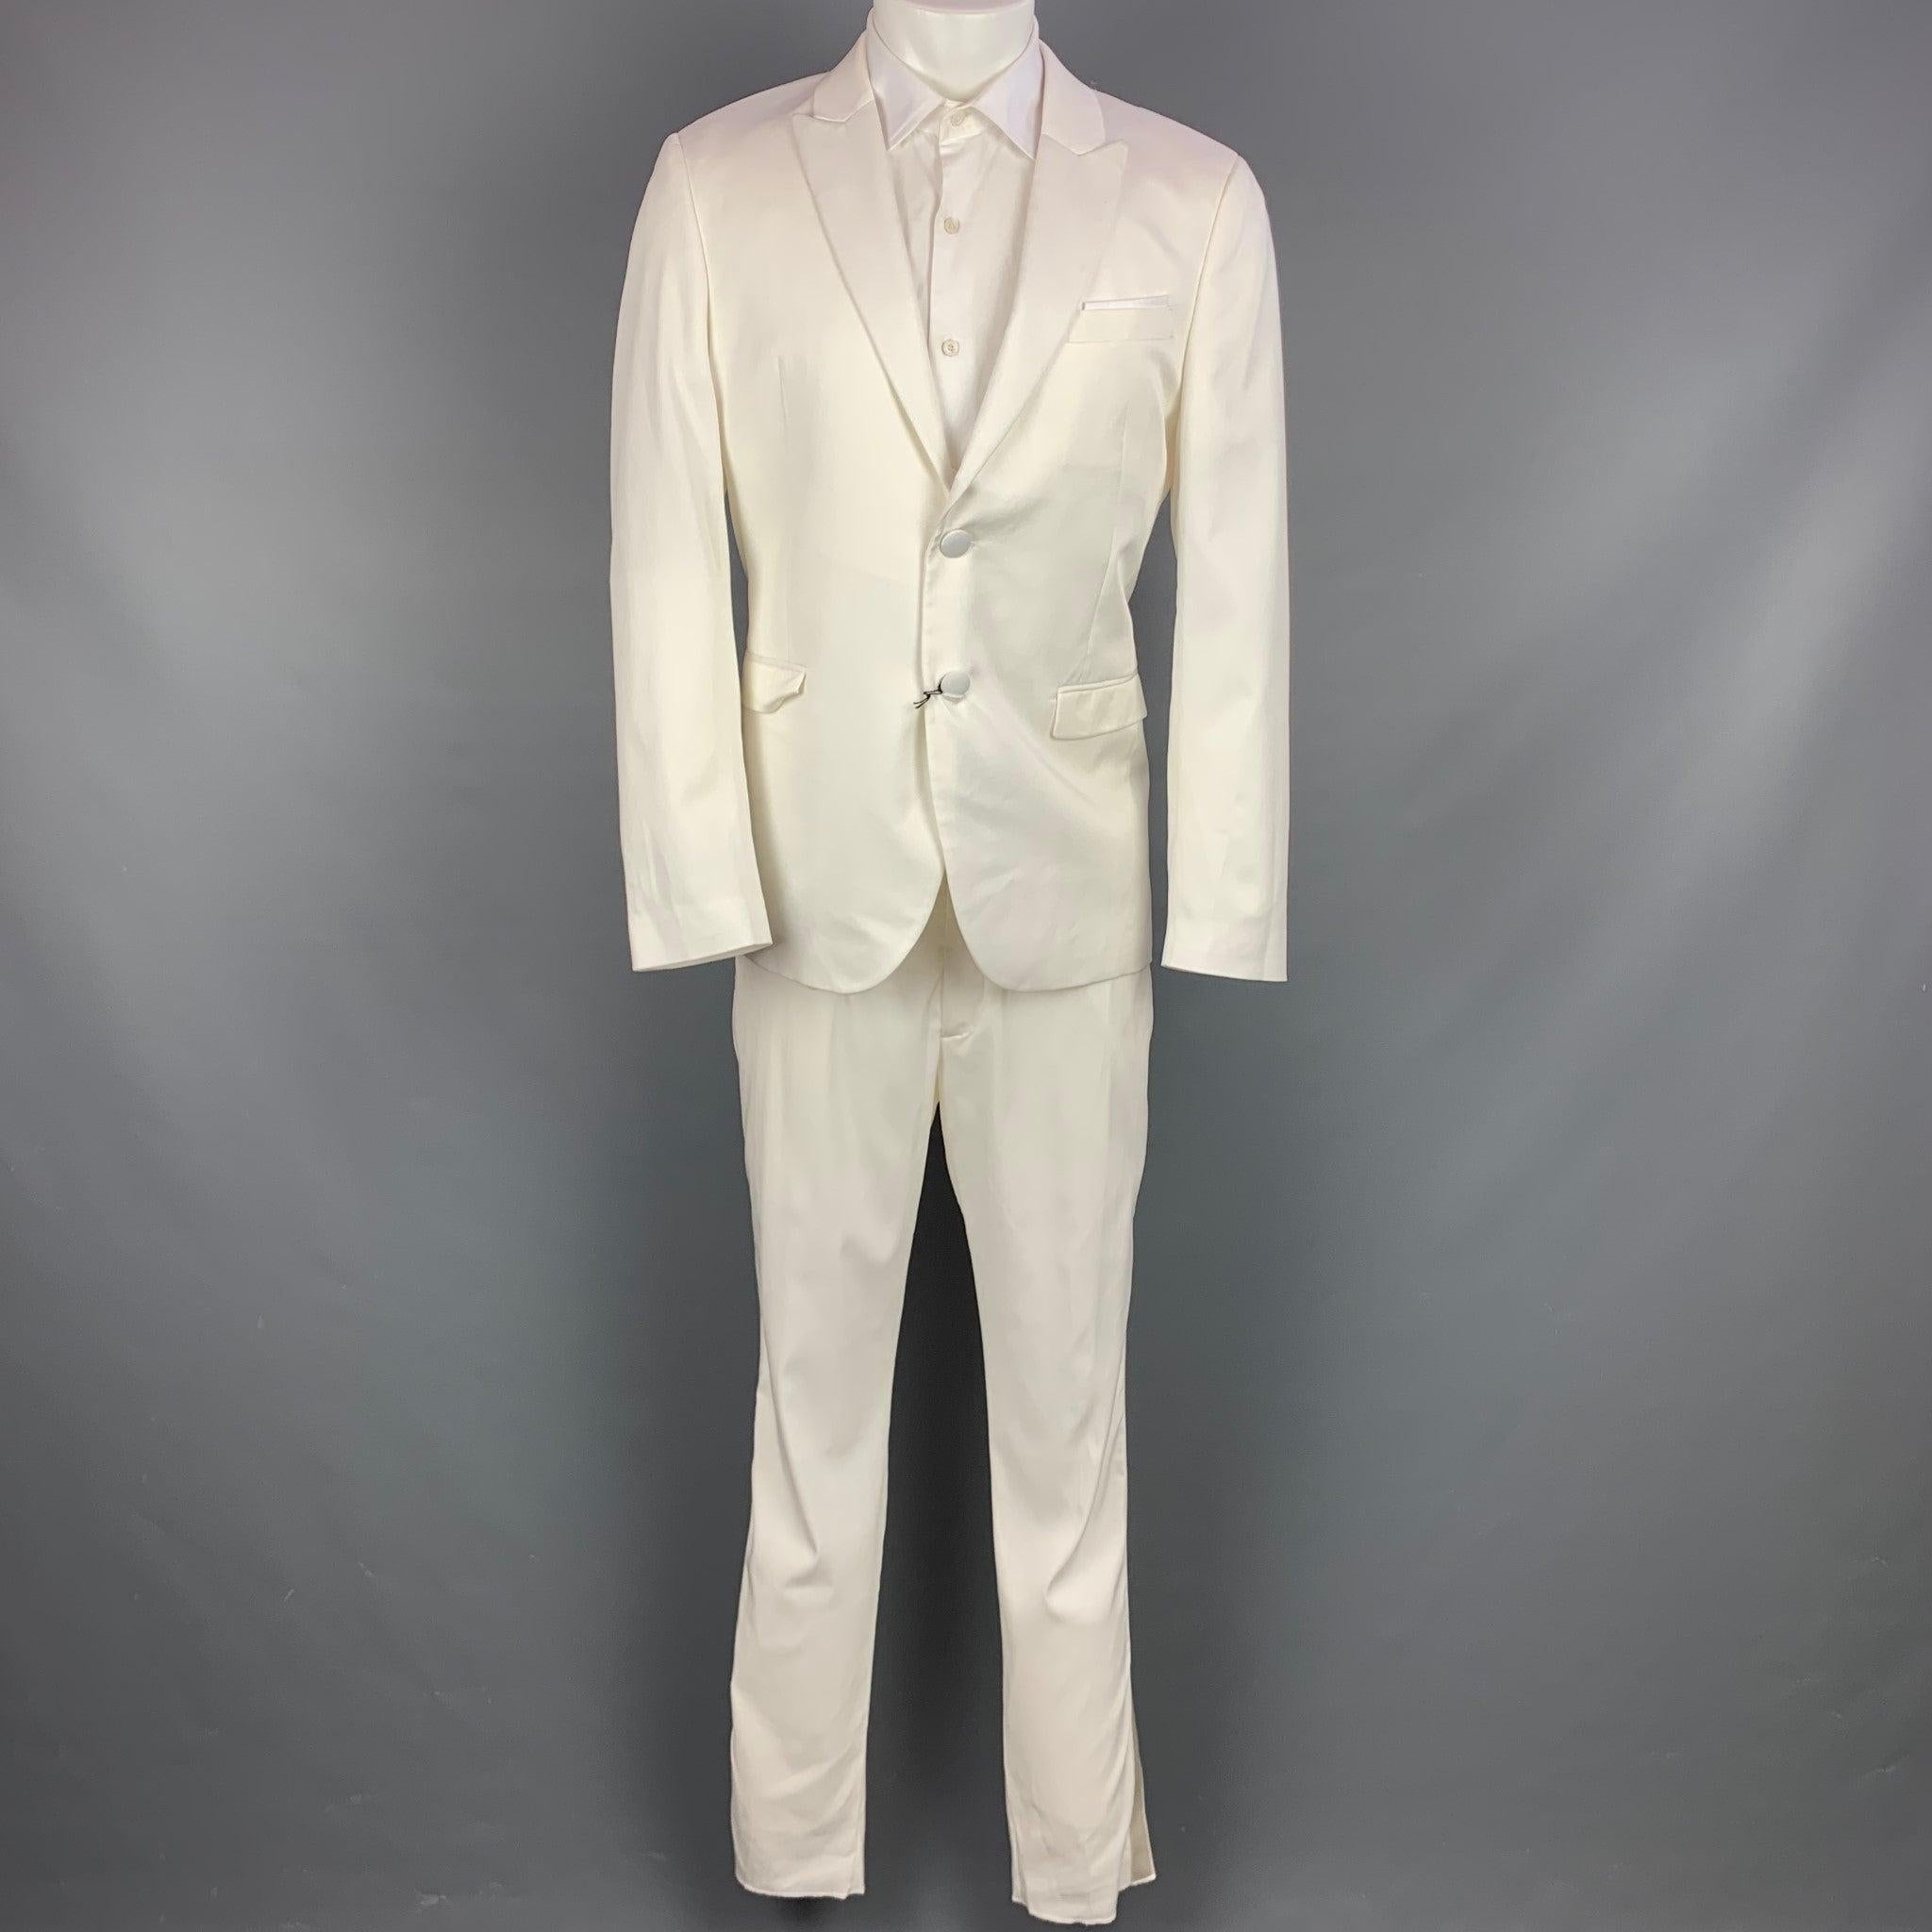 NEIL BARRETT suit comes in a white tencel with a full liner and includes a single breasted, double button sport coat with lapel peak and matching flat front trousers. Made in Italy. New With Tags.  

Marked:   Jacket: IT 50Pants: IT 50